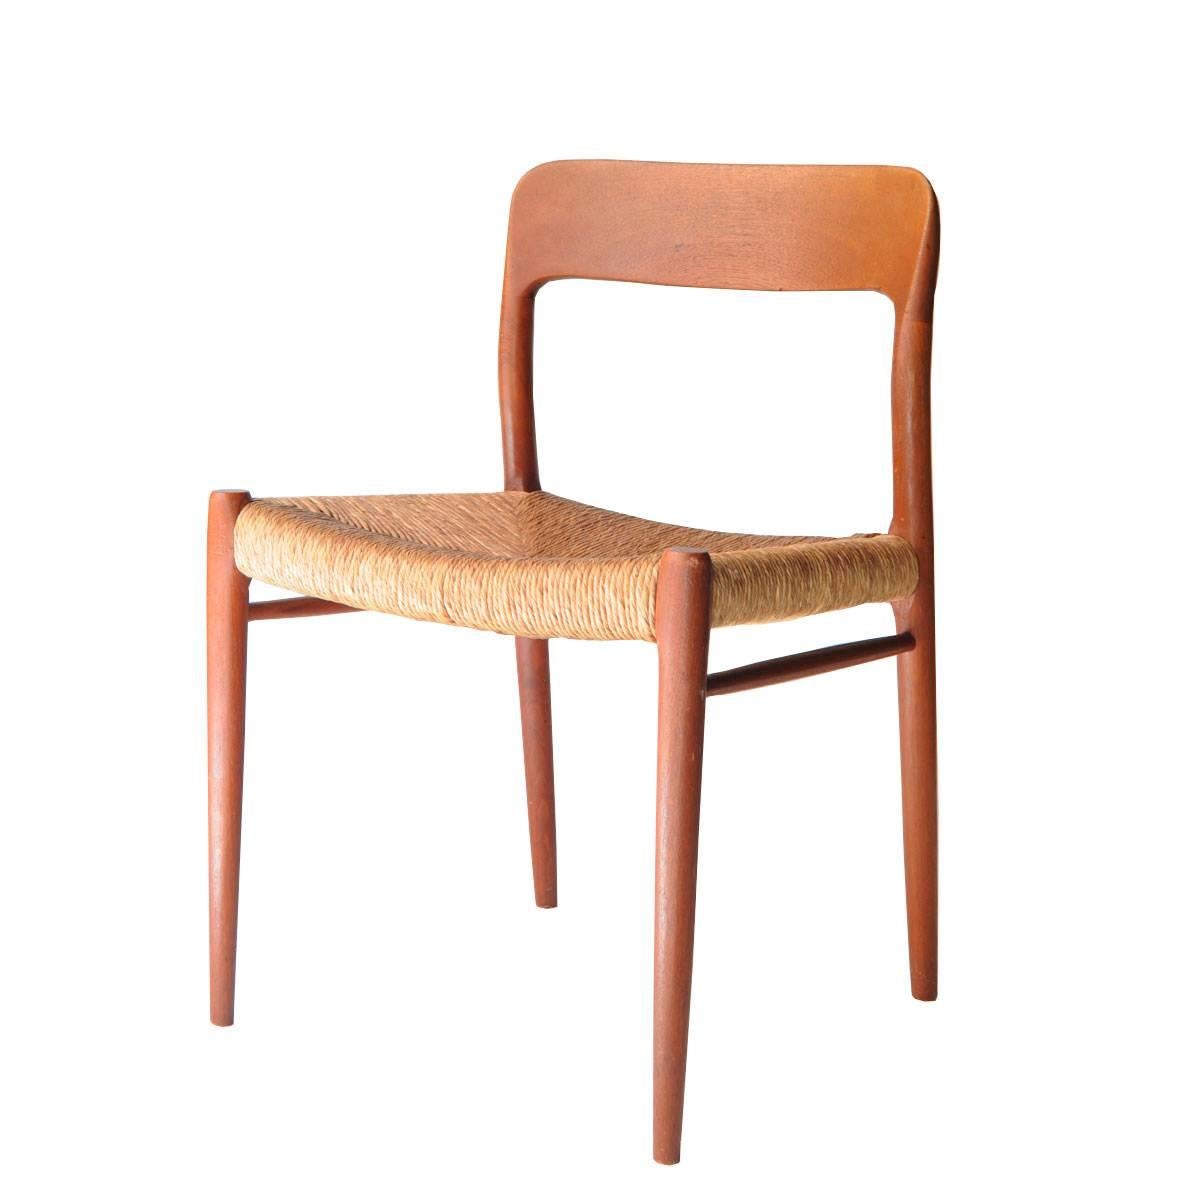 Set of four chairs designed by N.O. Møller with structure made of teak and cattail seat.